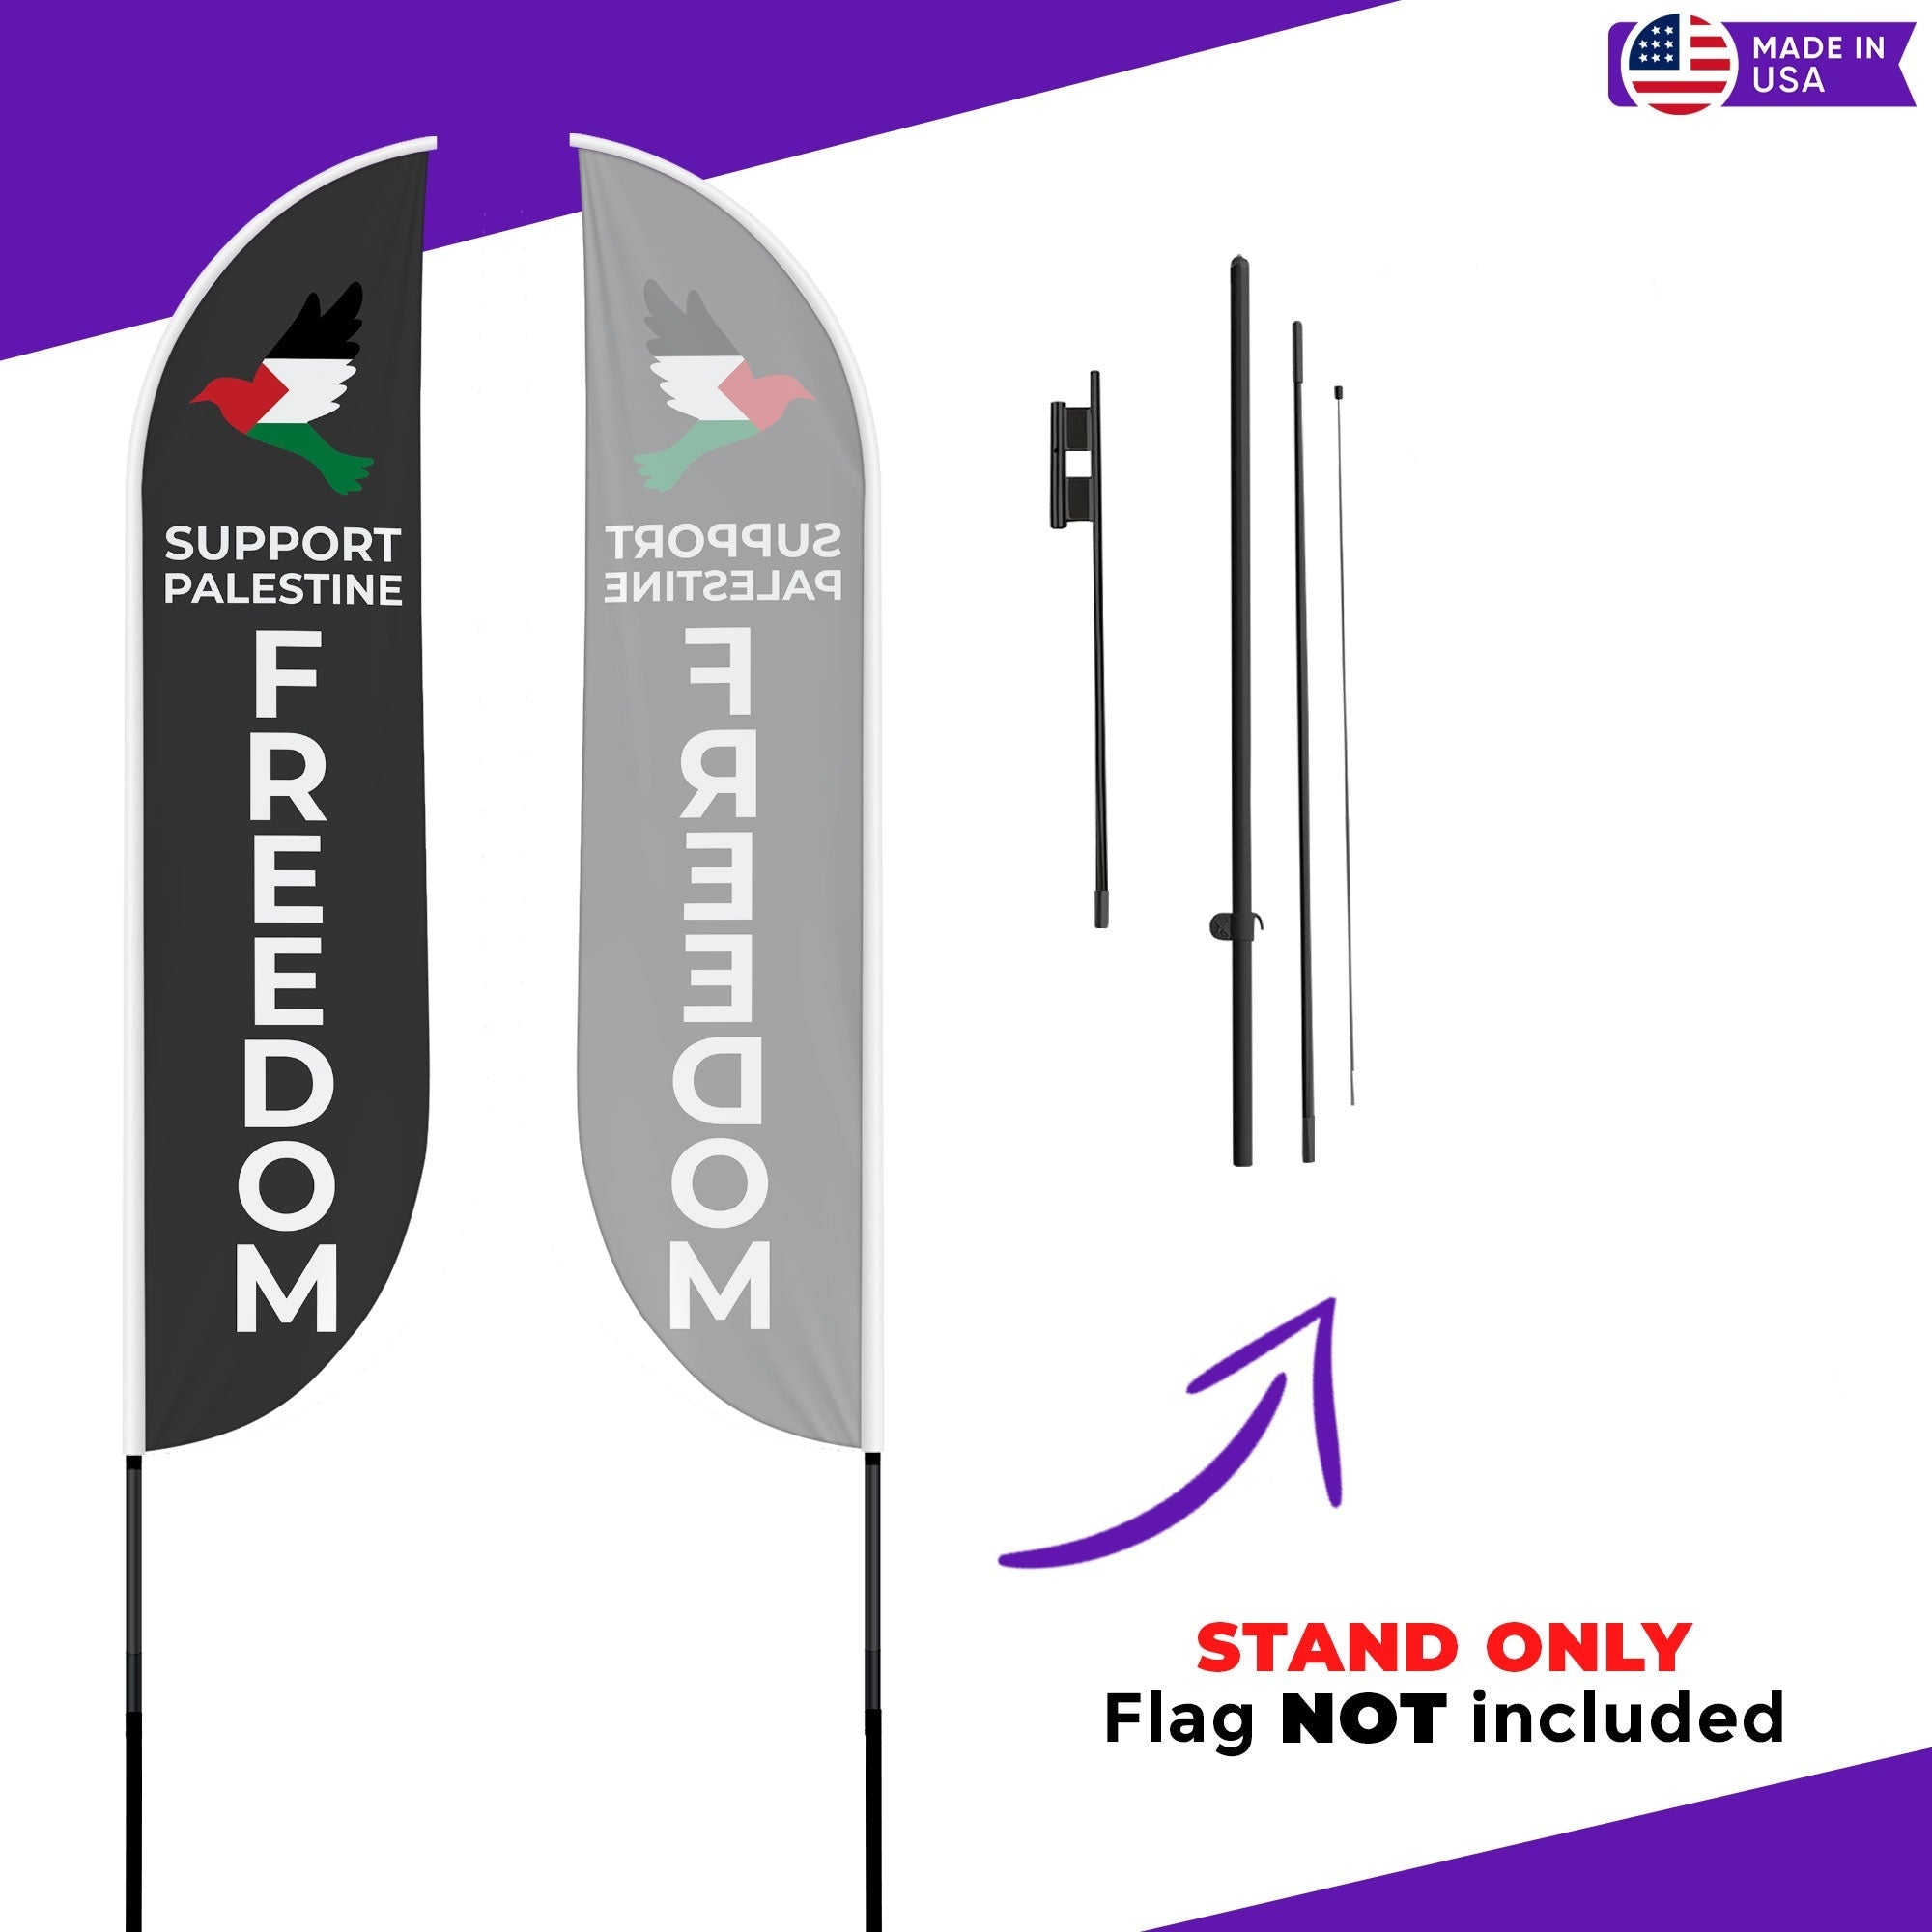 Palestine's Freedom Feather Flag - Weather-resistant, vivid colors, durable design, large size, easy installation